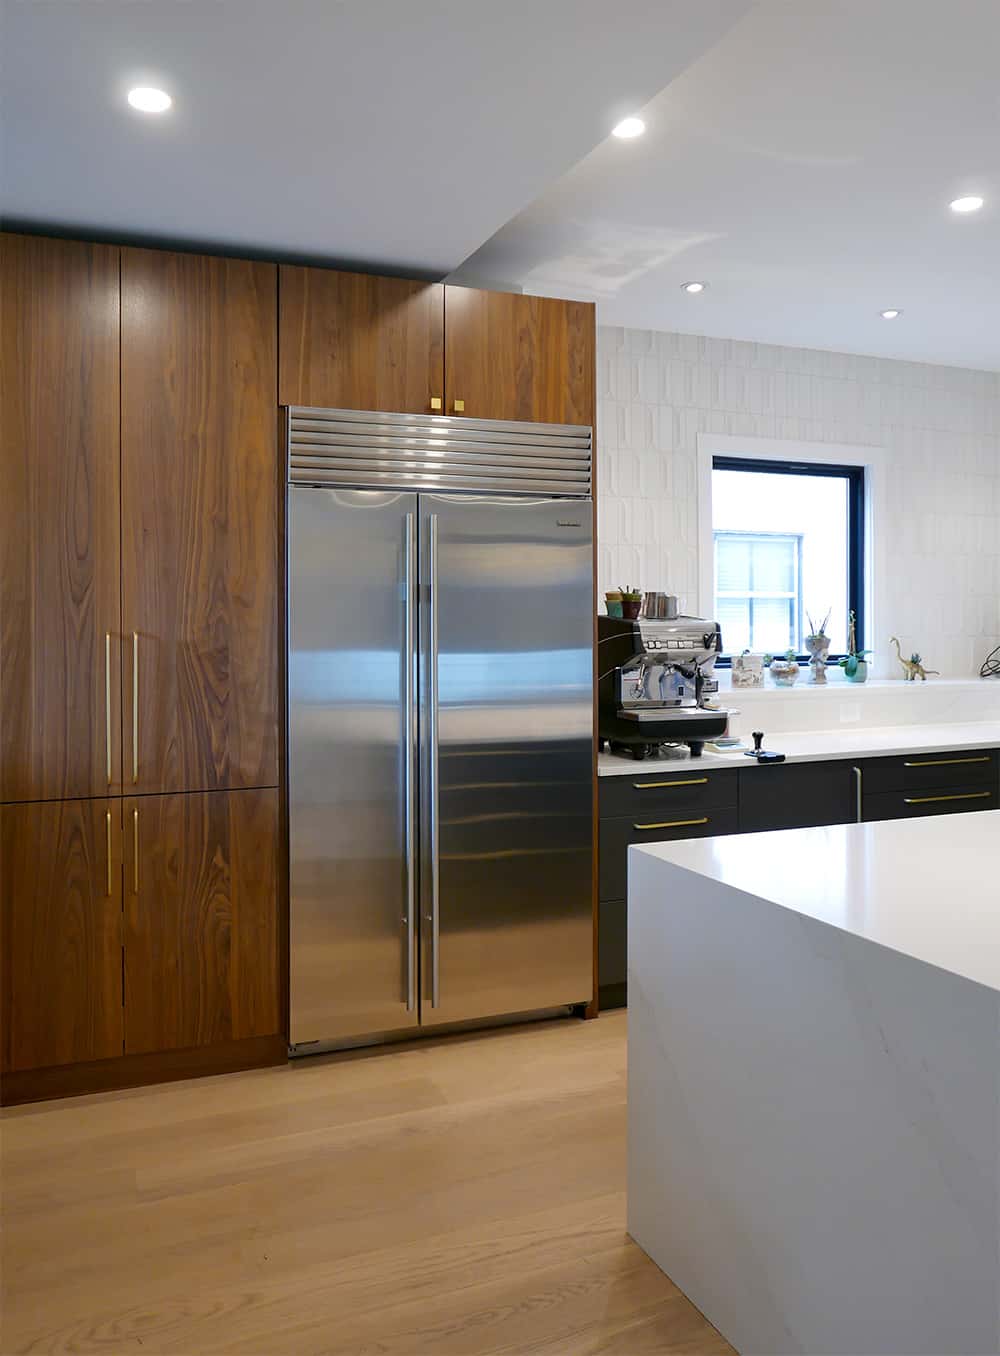 View of built-in refrigerator and cabinetry